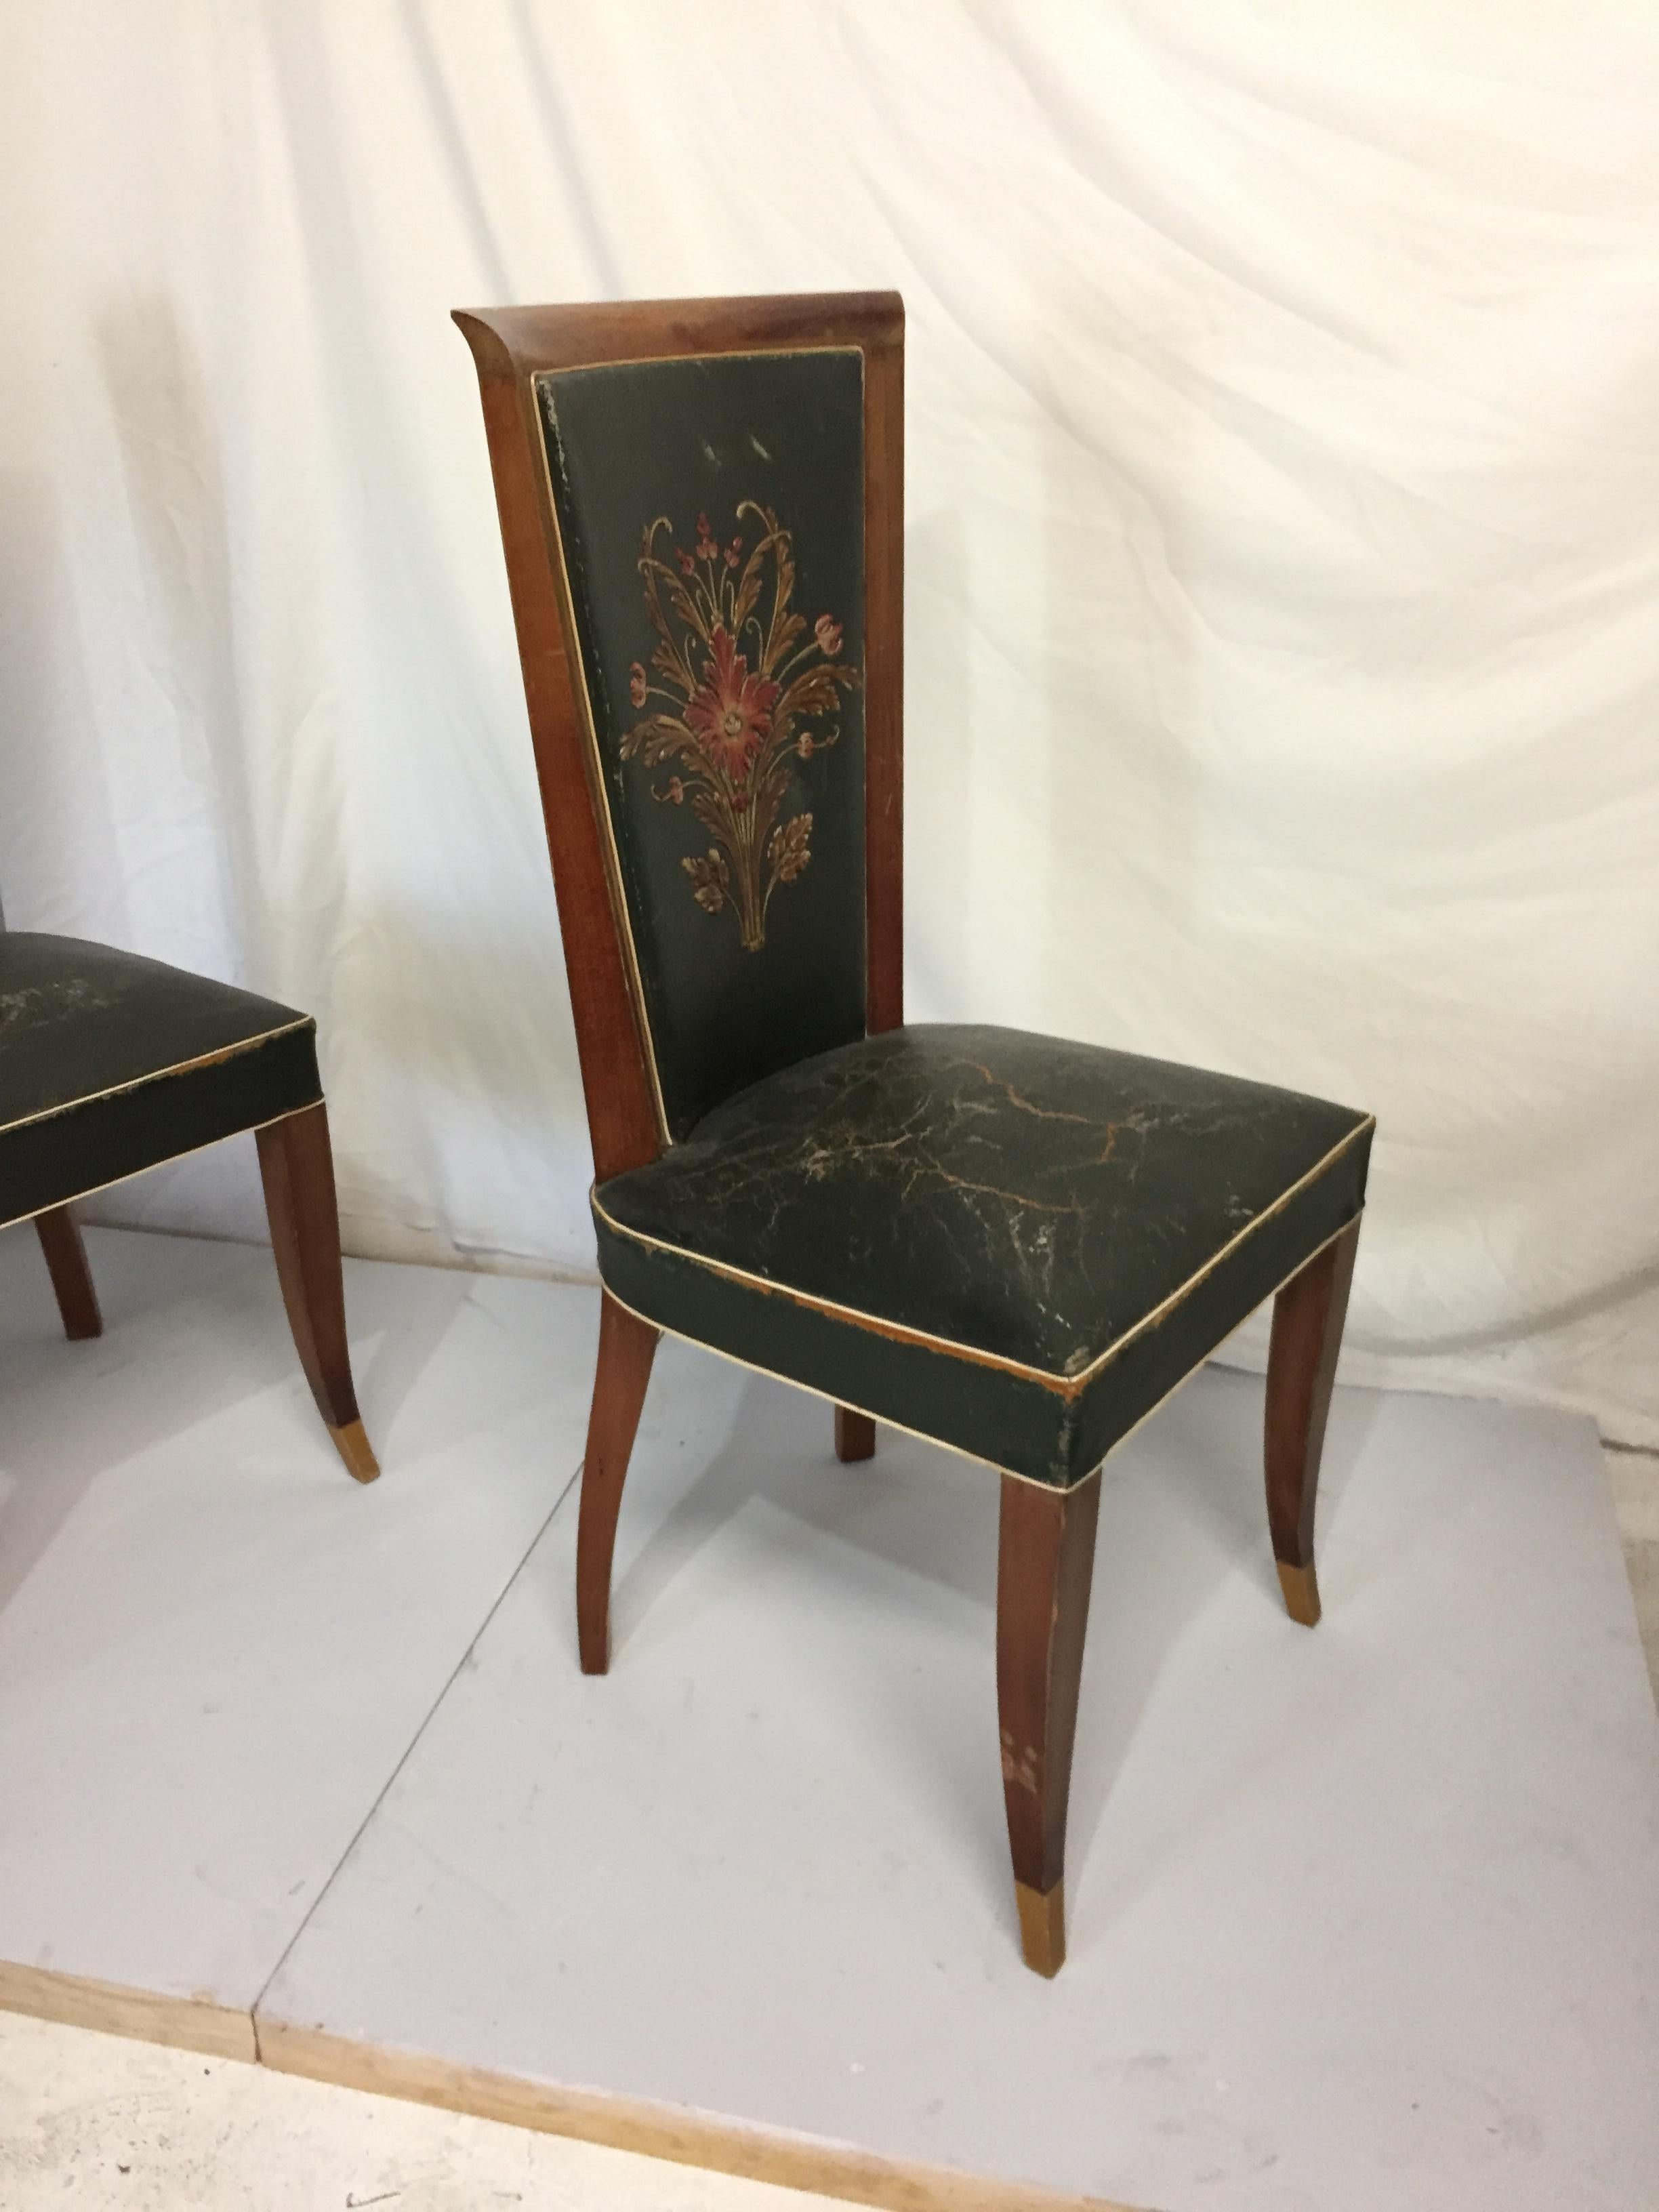 Six Art Deco Chairs in Green Leather Original Condition For Sale 3